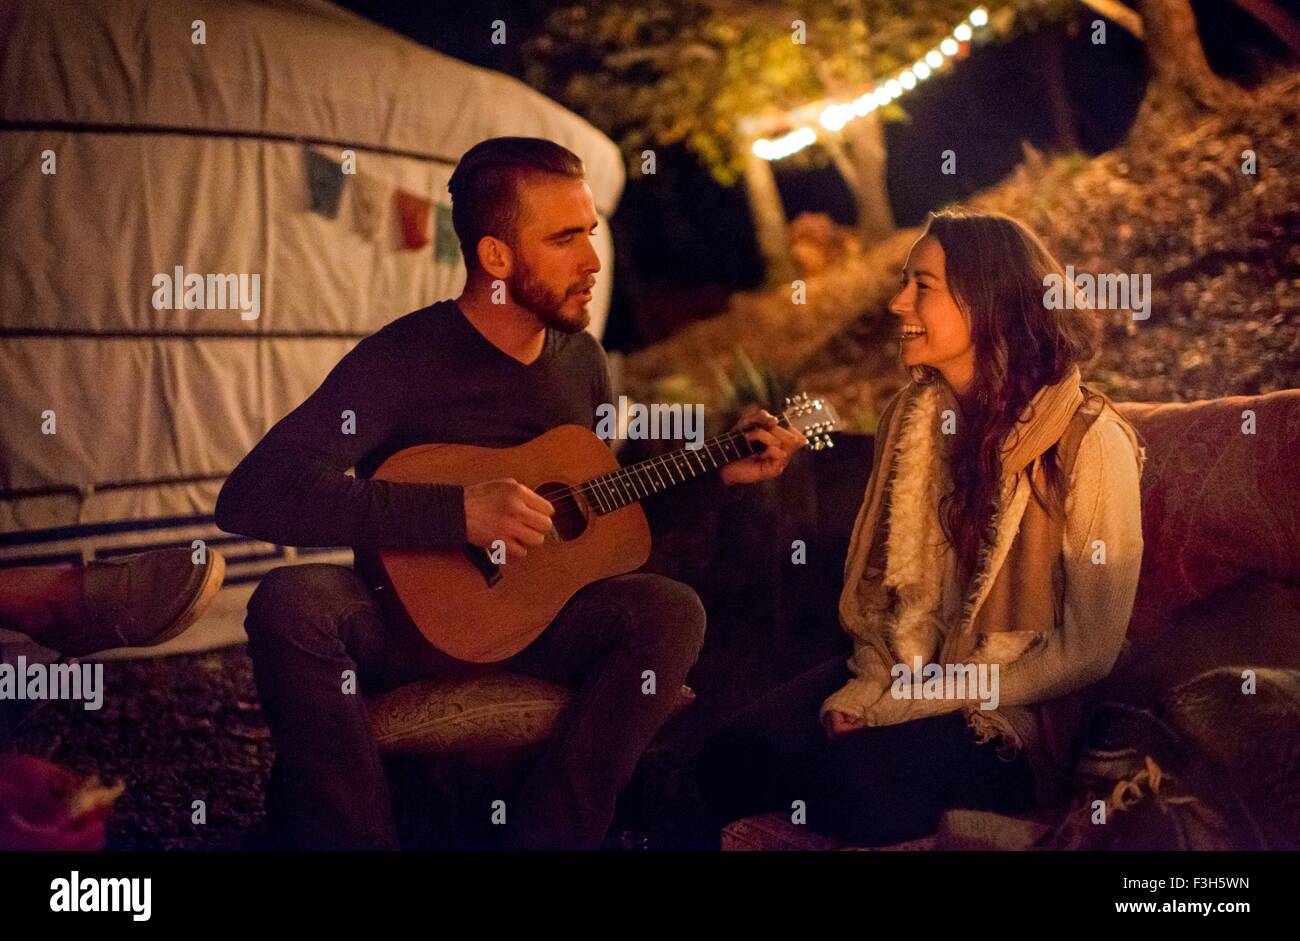 Young man serenading young woman with guitar next to yurt Stock Photo